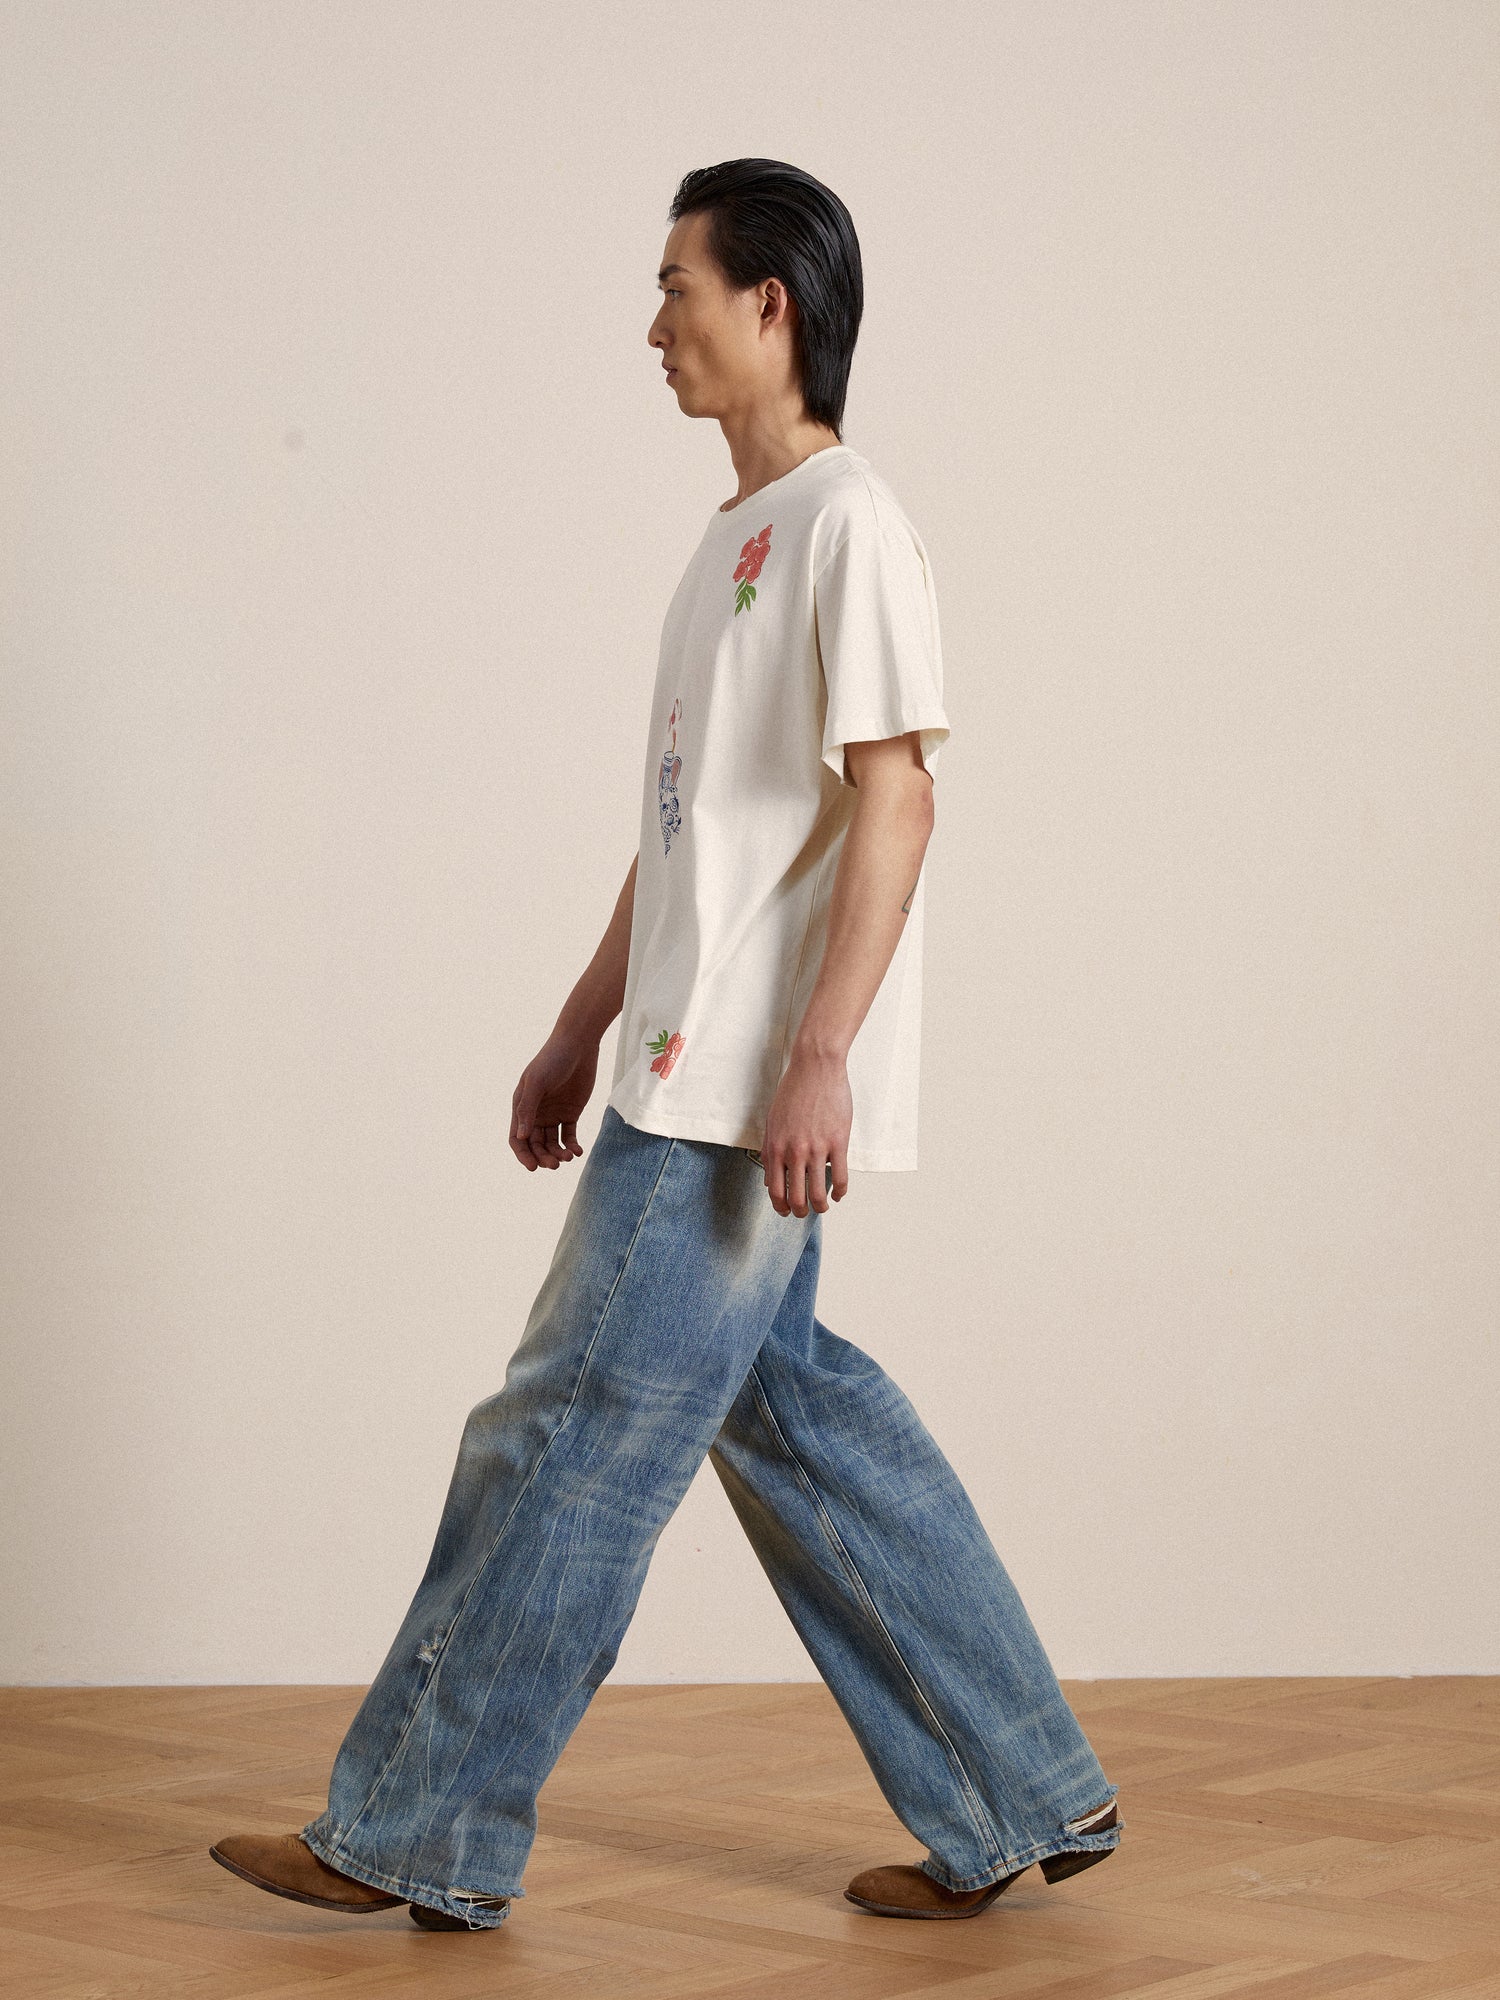 A man wearing a Found Flower Pot Tee and jeans walking on a wooden floor.